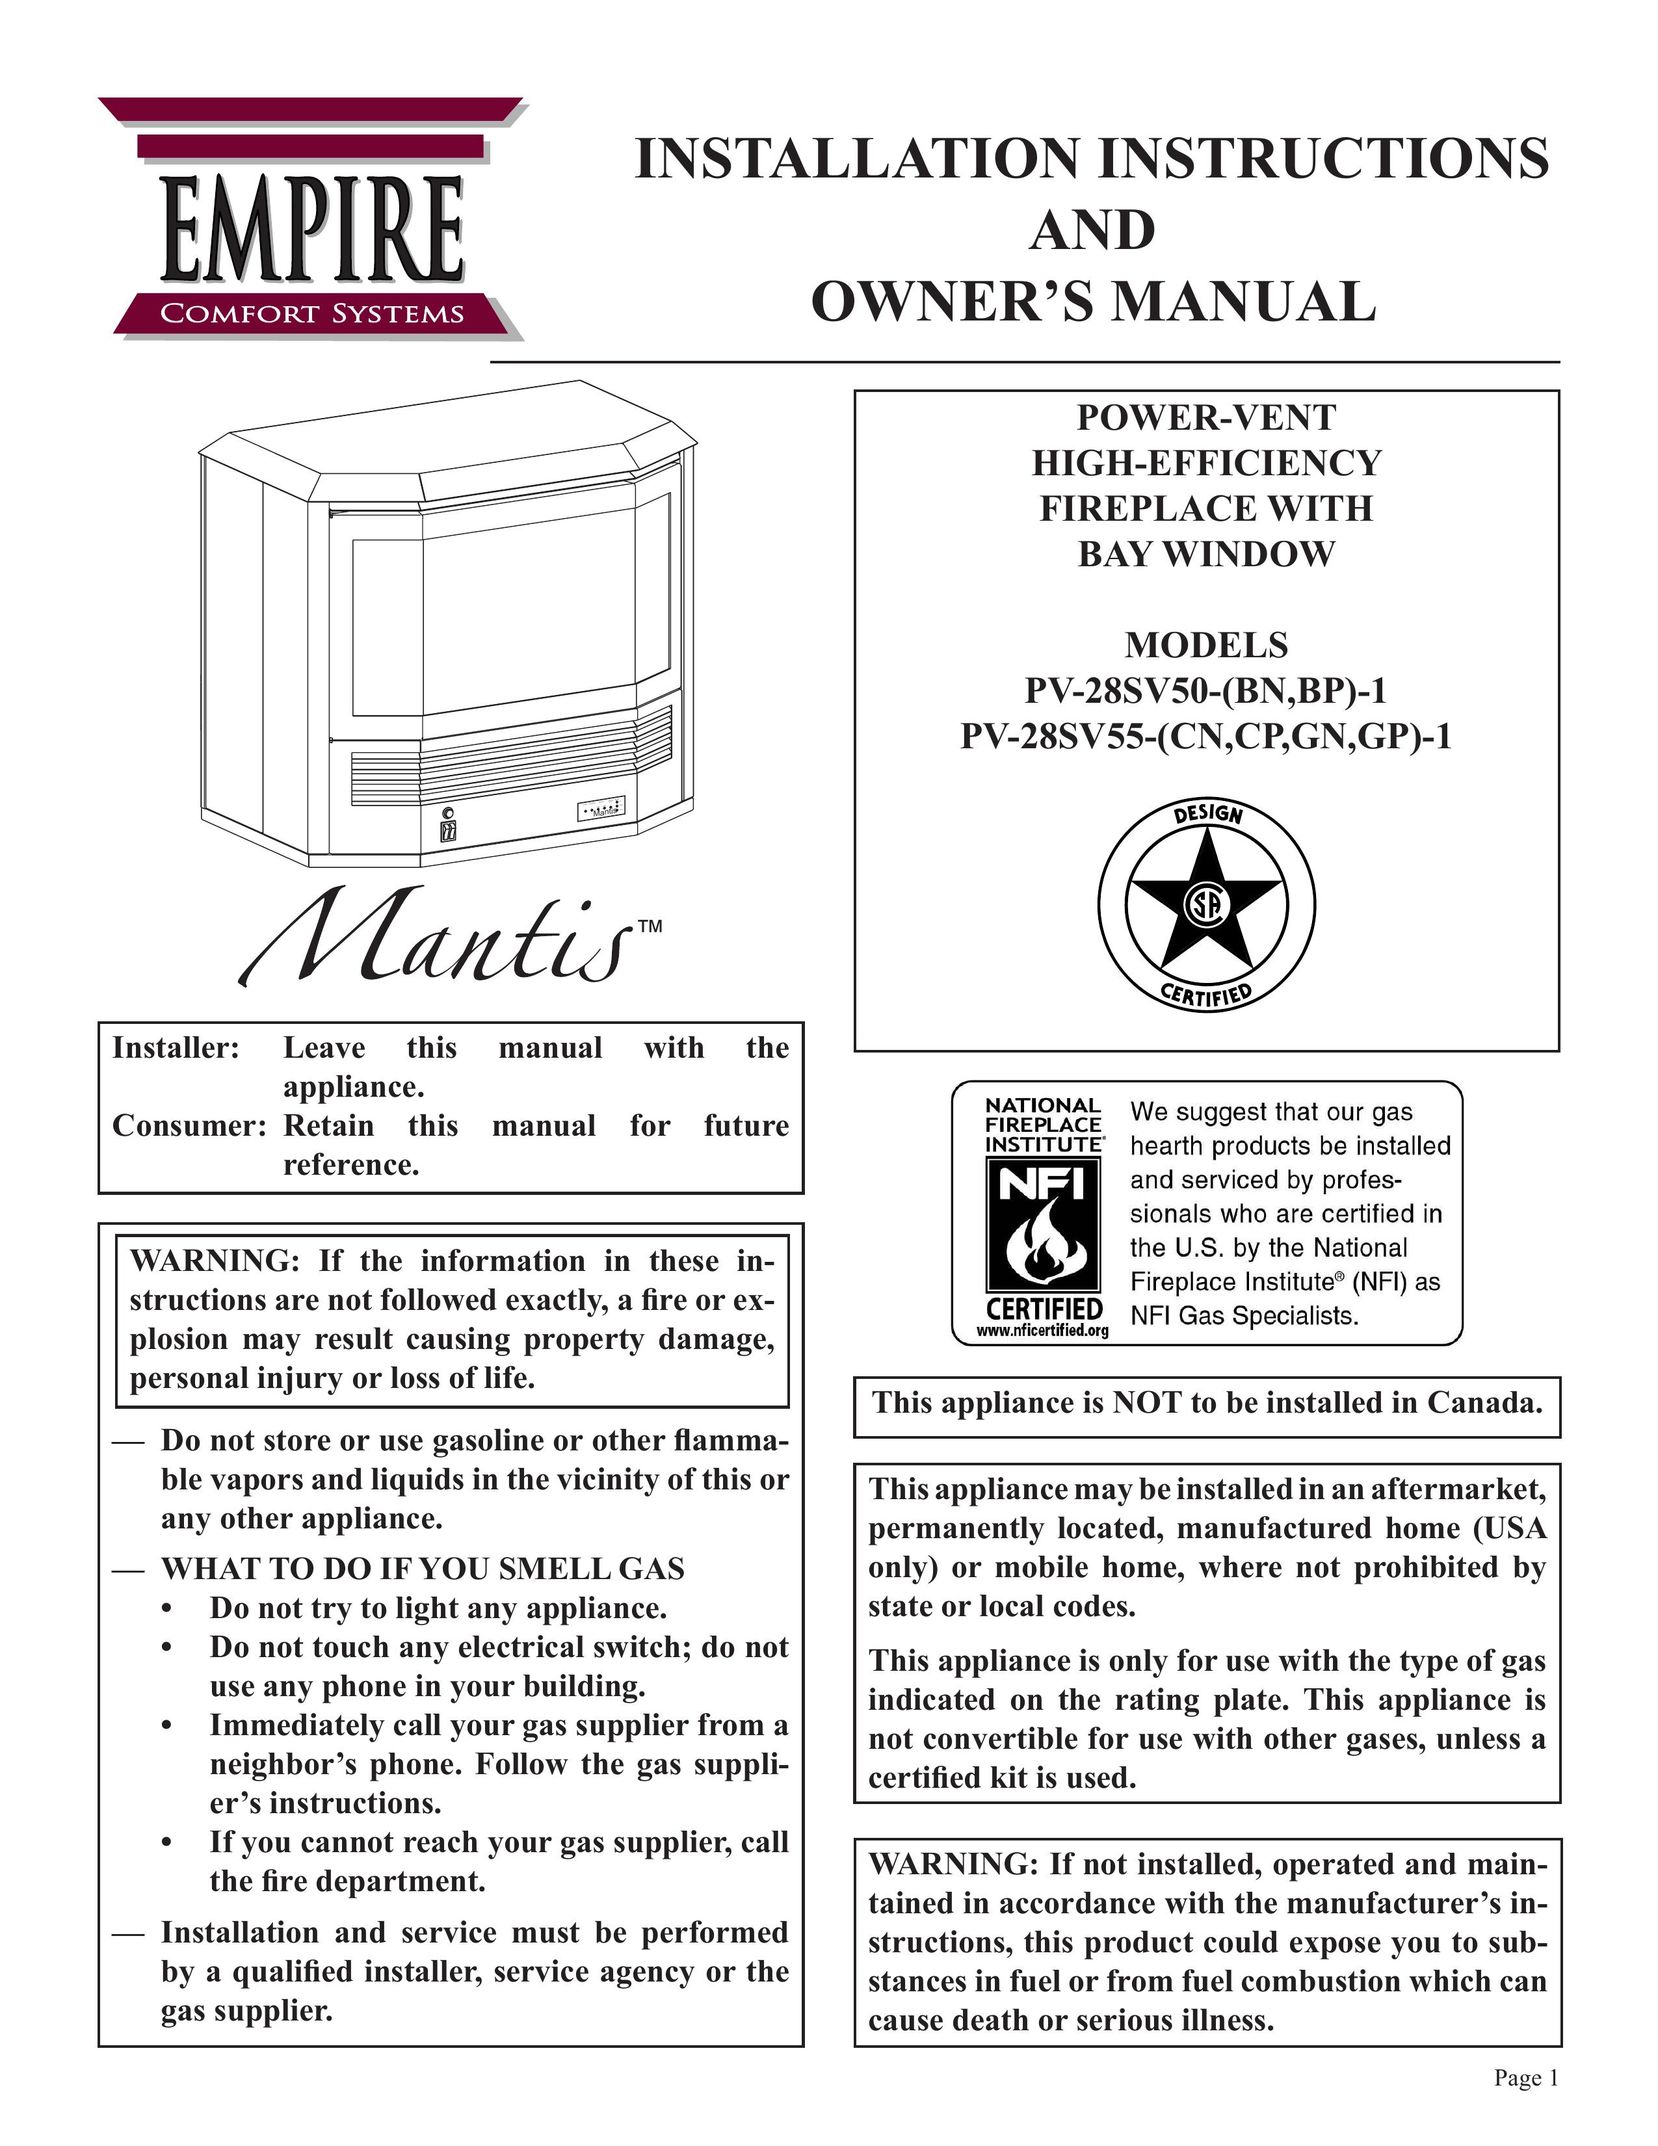 Empire Comfort Systems BP)-1 Indoor Fireplace User Manual